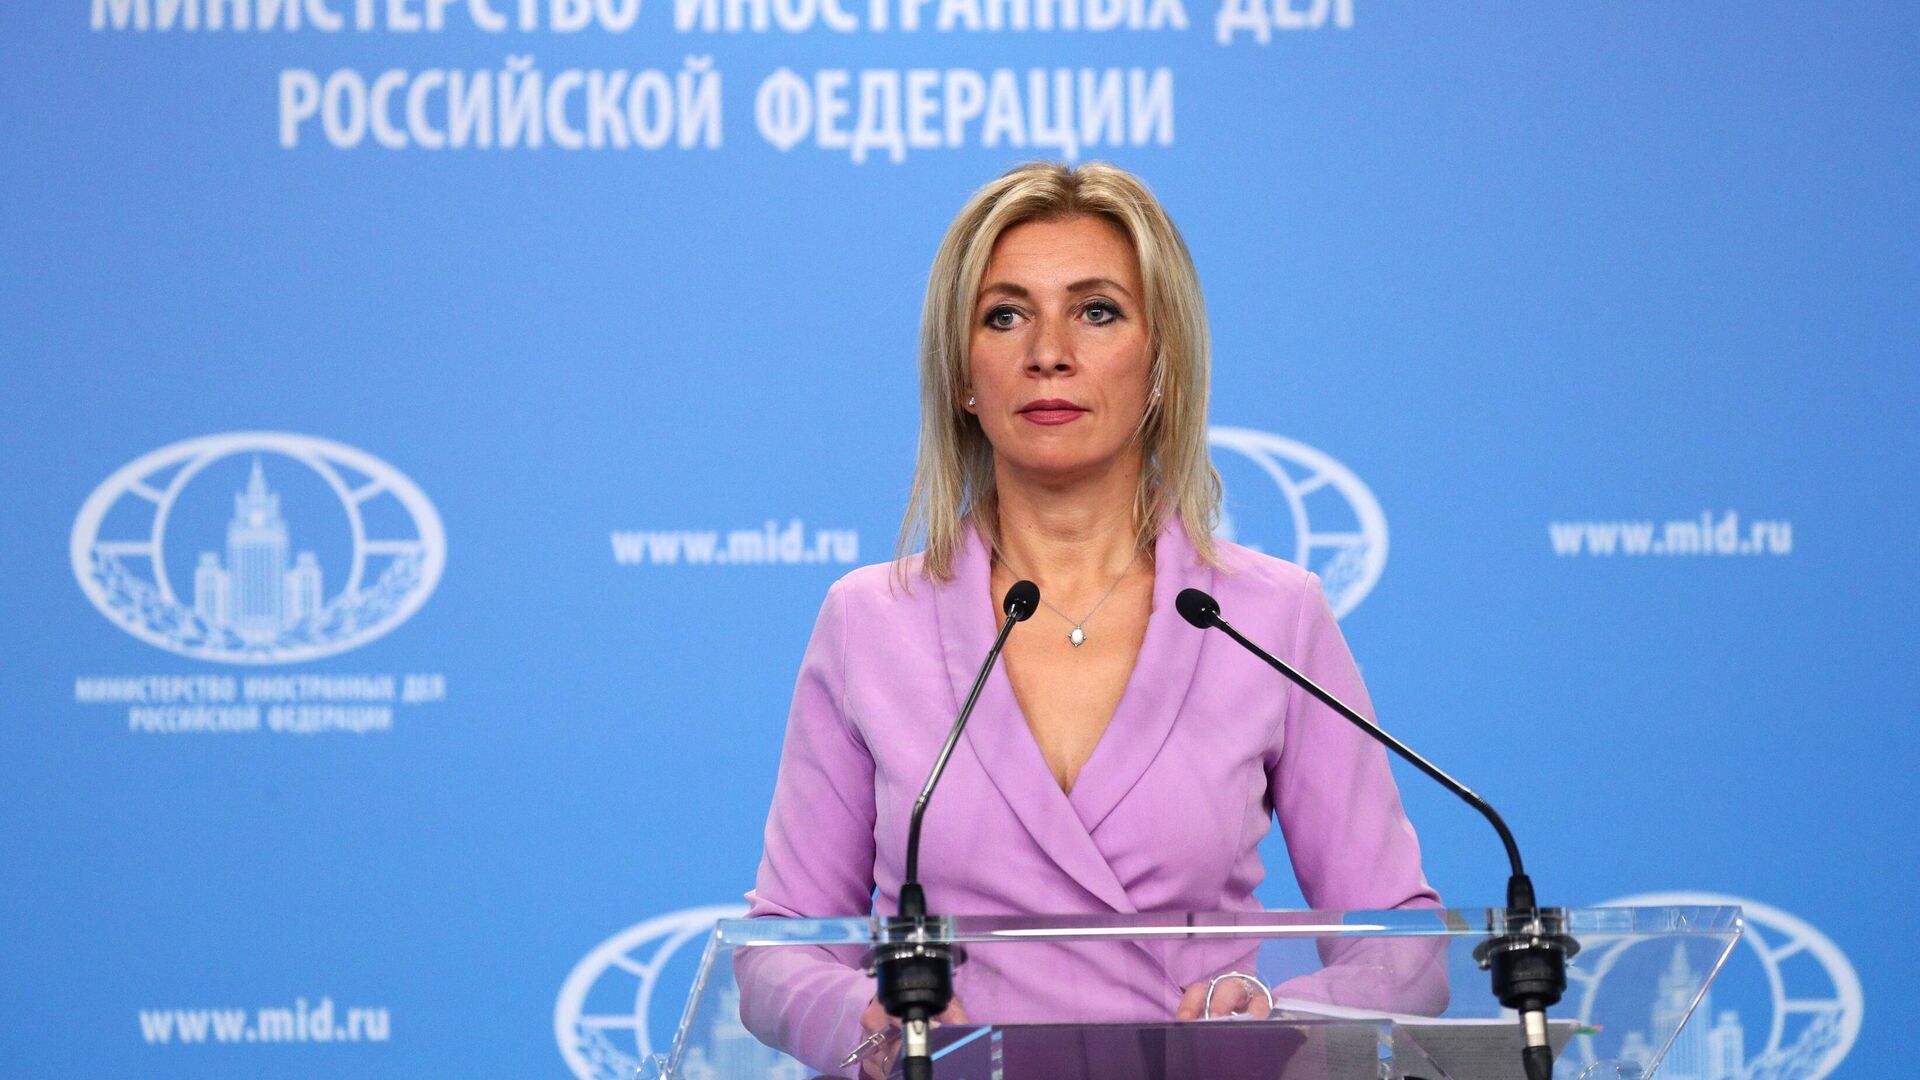 Russian MFA says Kyiv ‘effectively takes all of Europe hostage’ by shelling nuclear plant